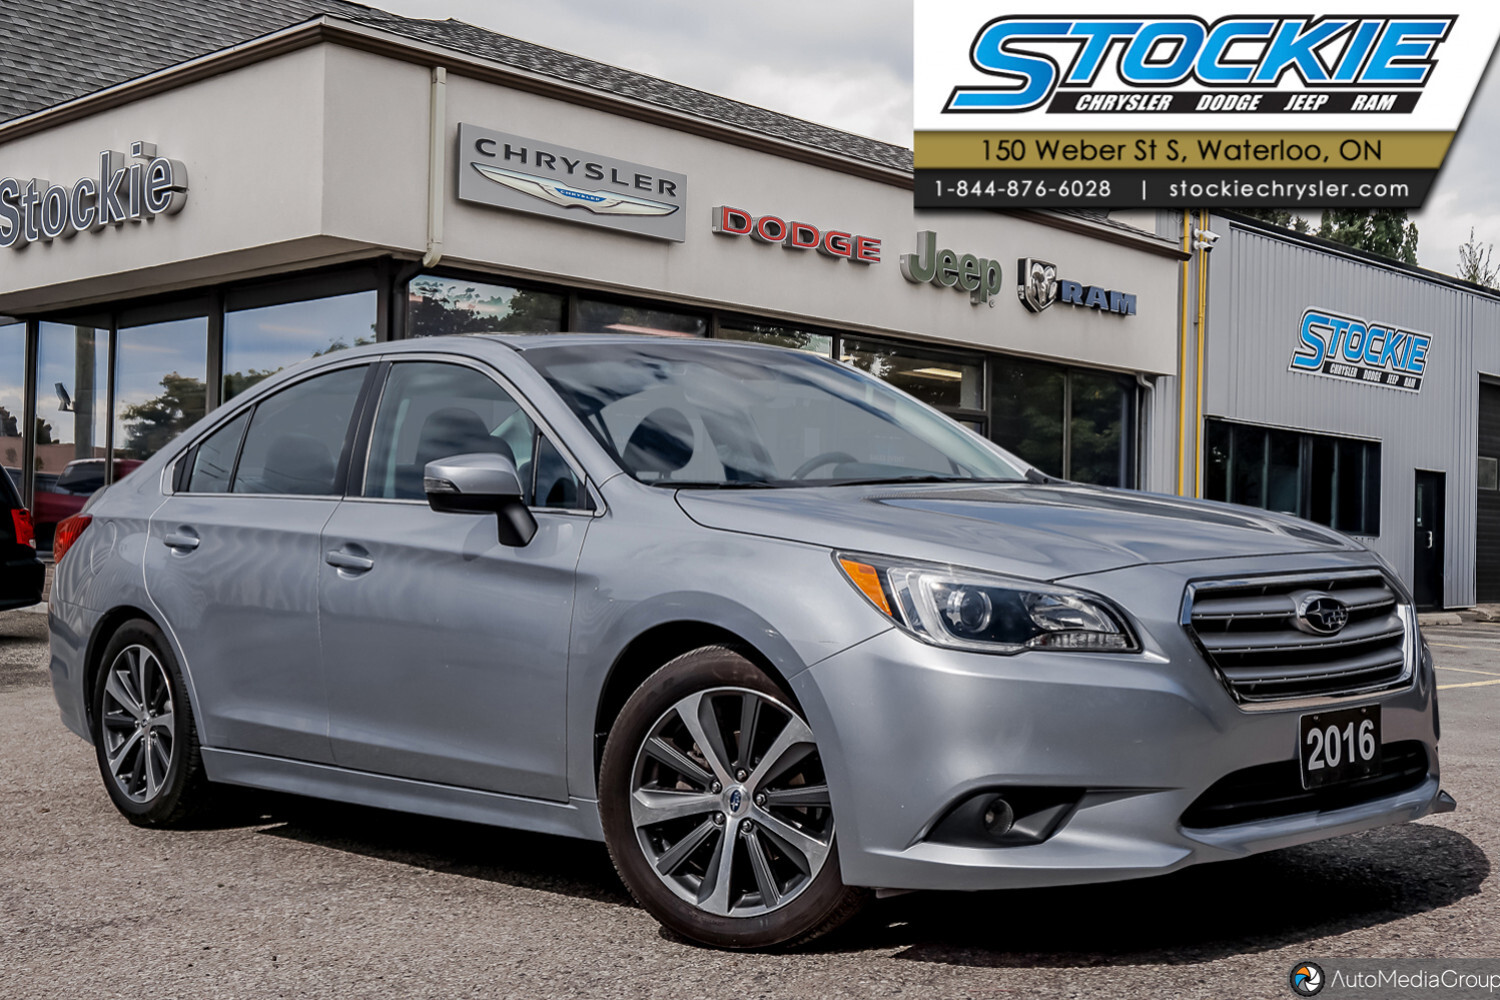 2016 Subaru Legacy   Yes, The Kms Really Are This Low!